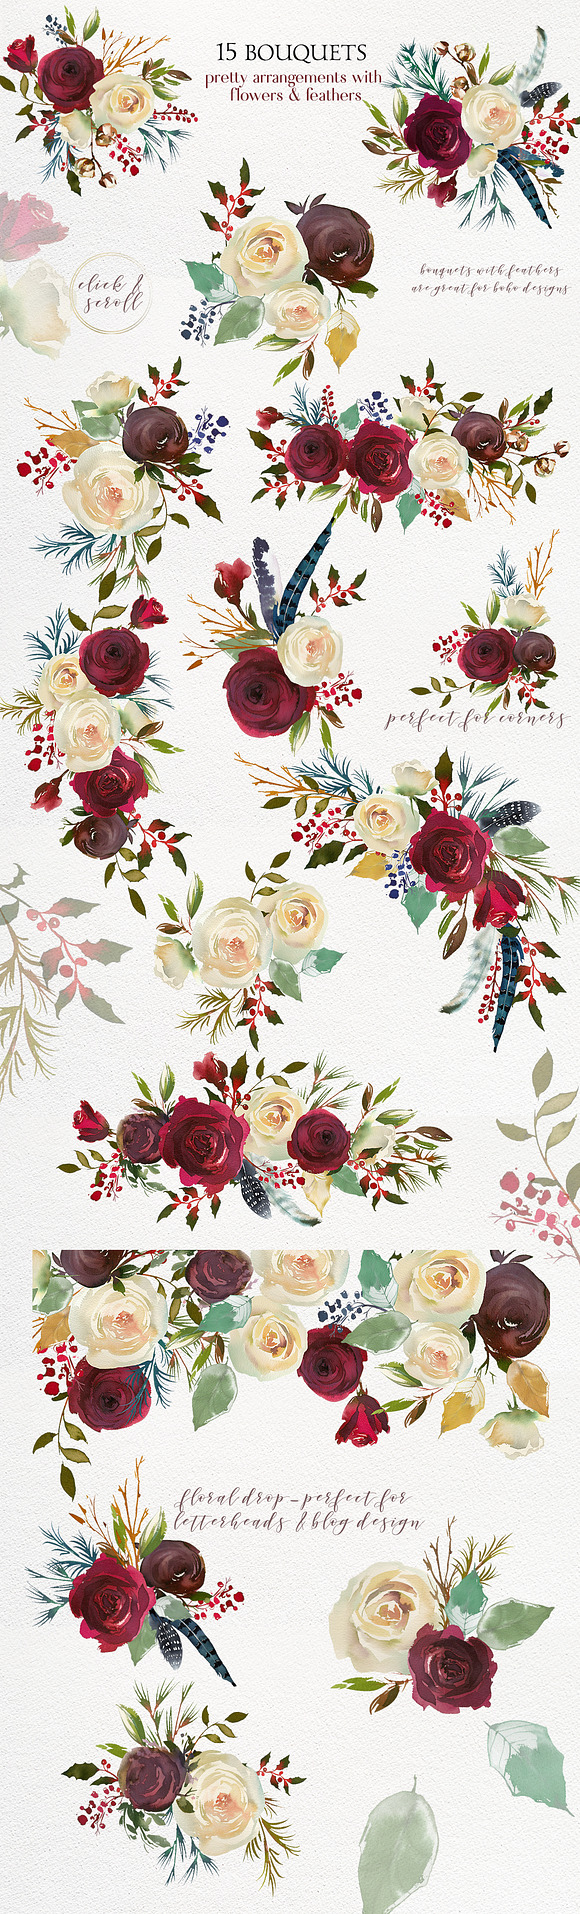 Winter Solemnity Floral Design Kit in Illustrations - product preview 3